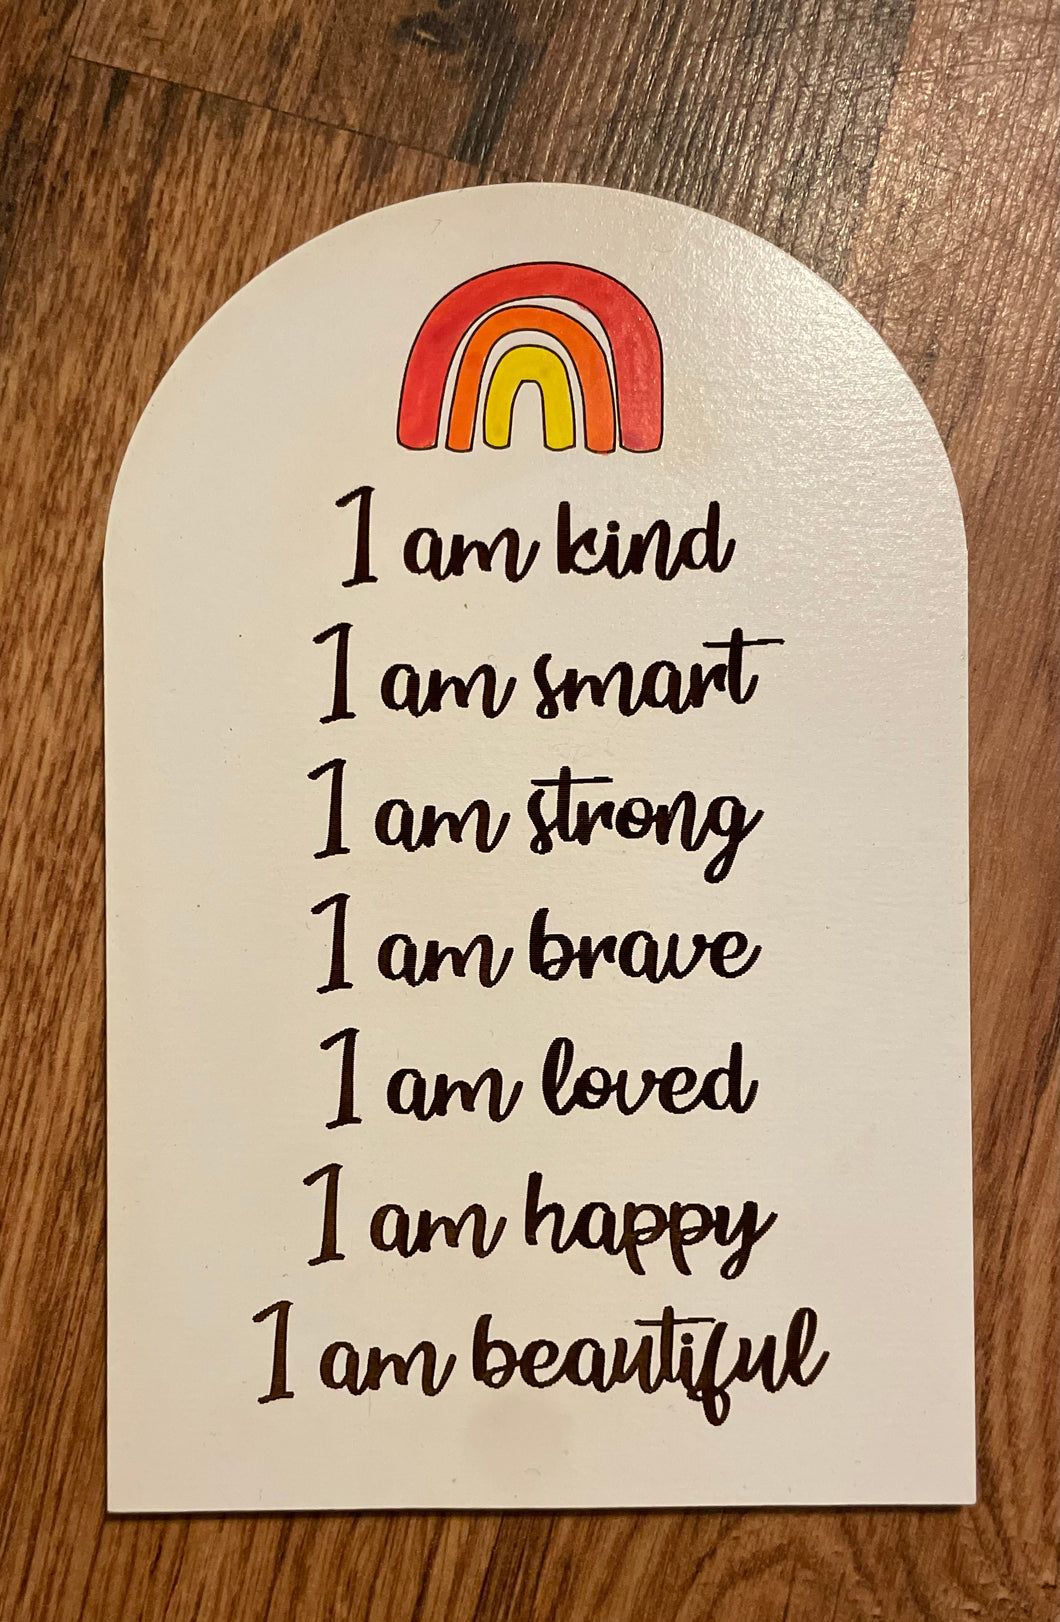 Small Positive Affirmation Boards